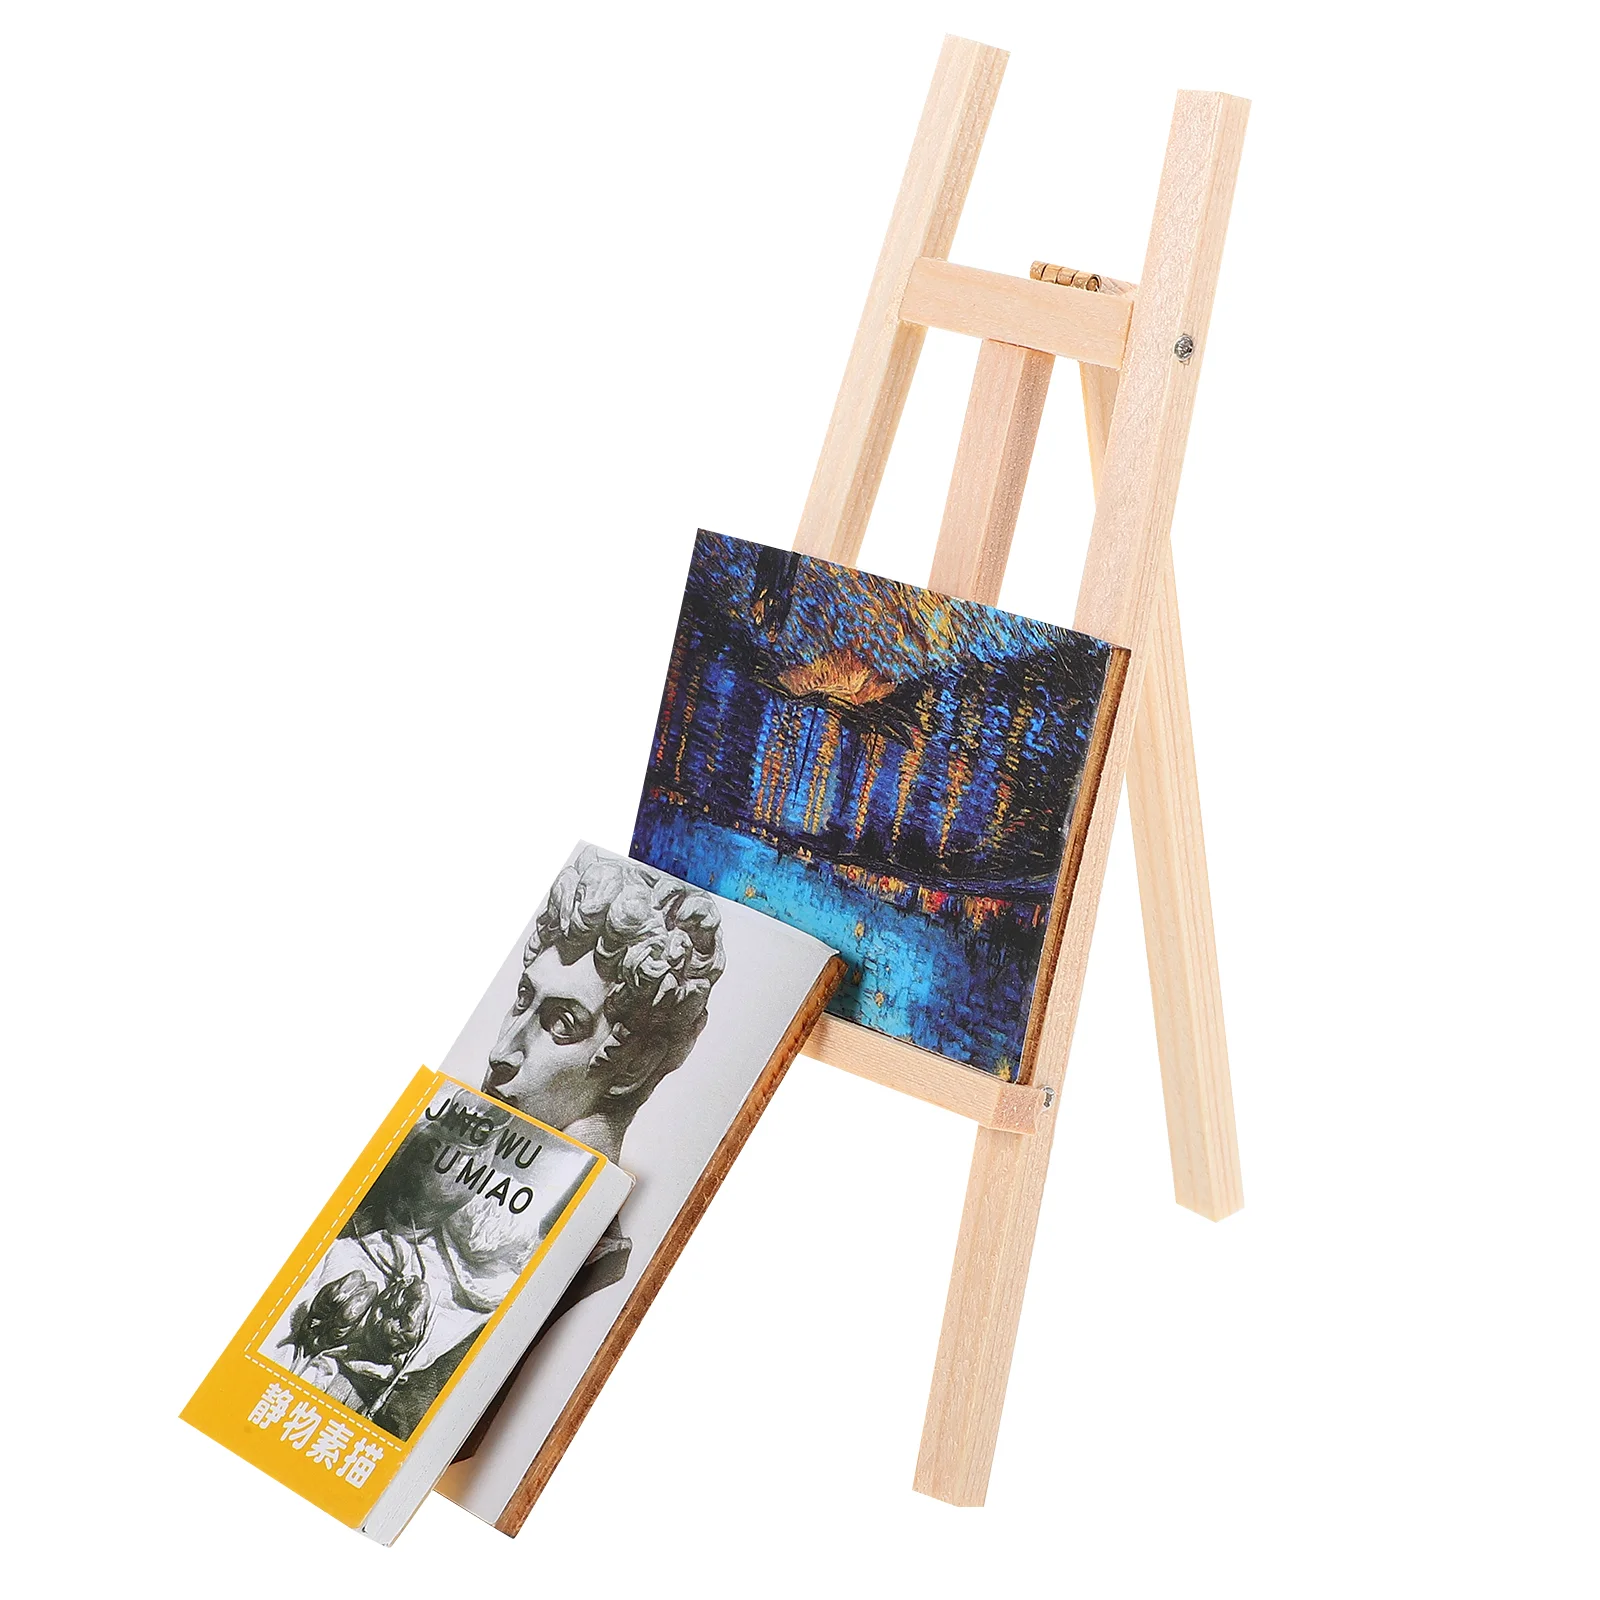 House Decorative Painting Mini Adornment Miniature Easel Wooden Board Furniture Small Model mini frame large easel stand for painting canvas holder stands canvases table top watercolor